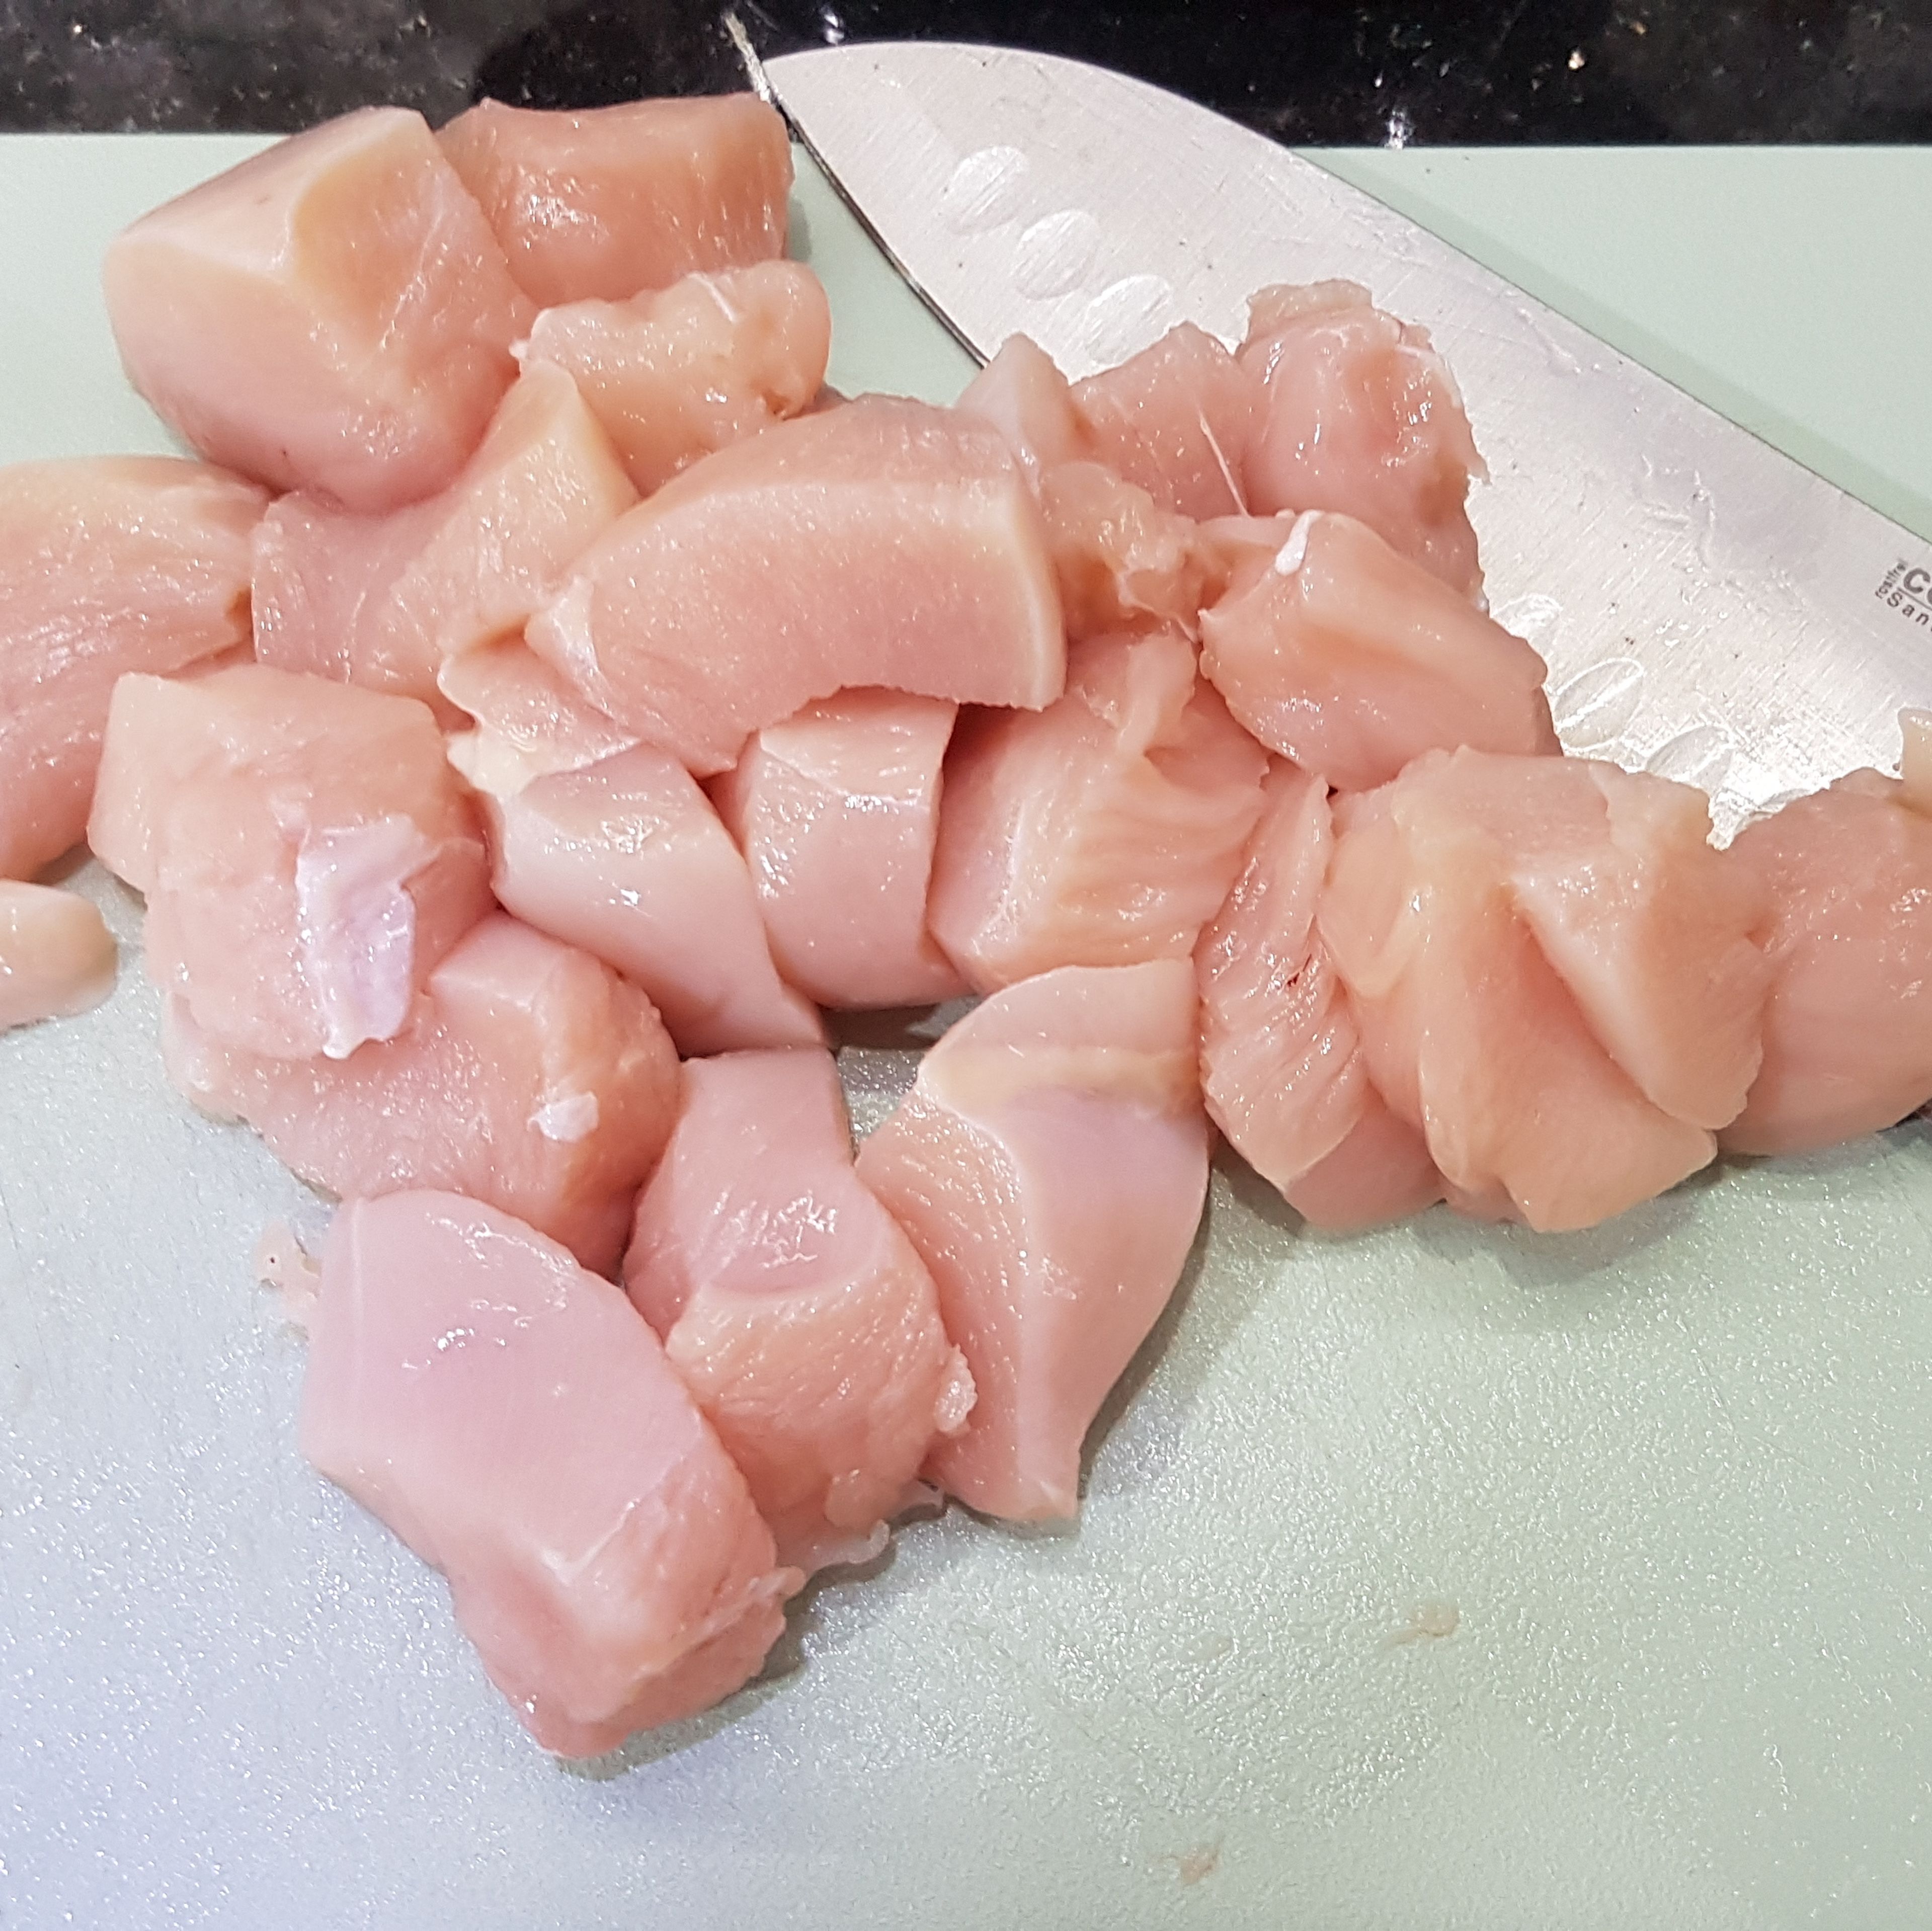 Cut the chicken breasts into cubes and add to the pot. Cook until tender.